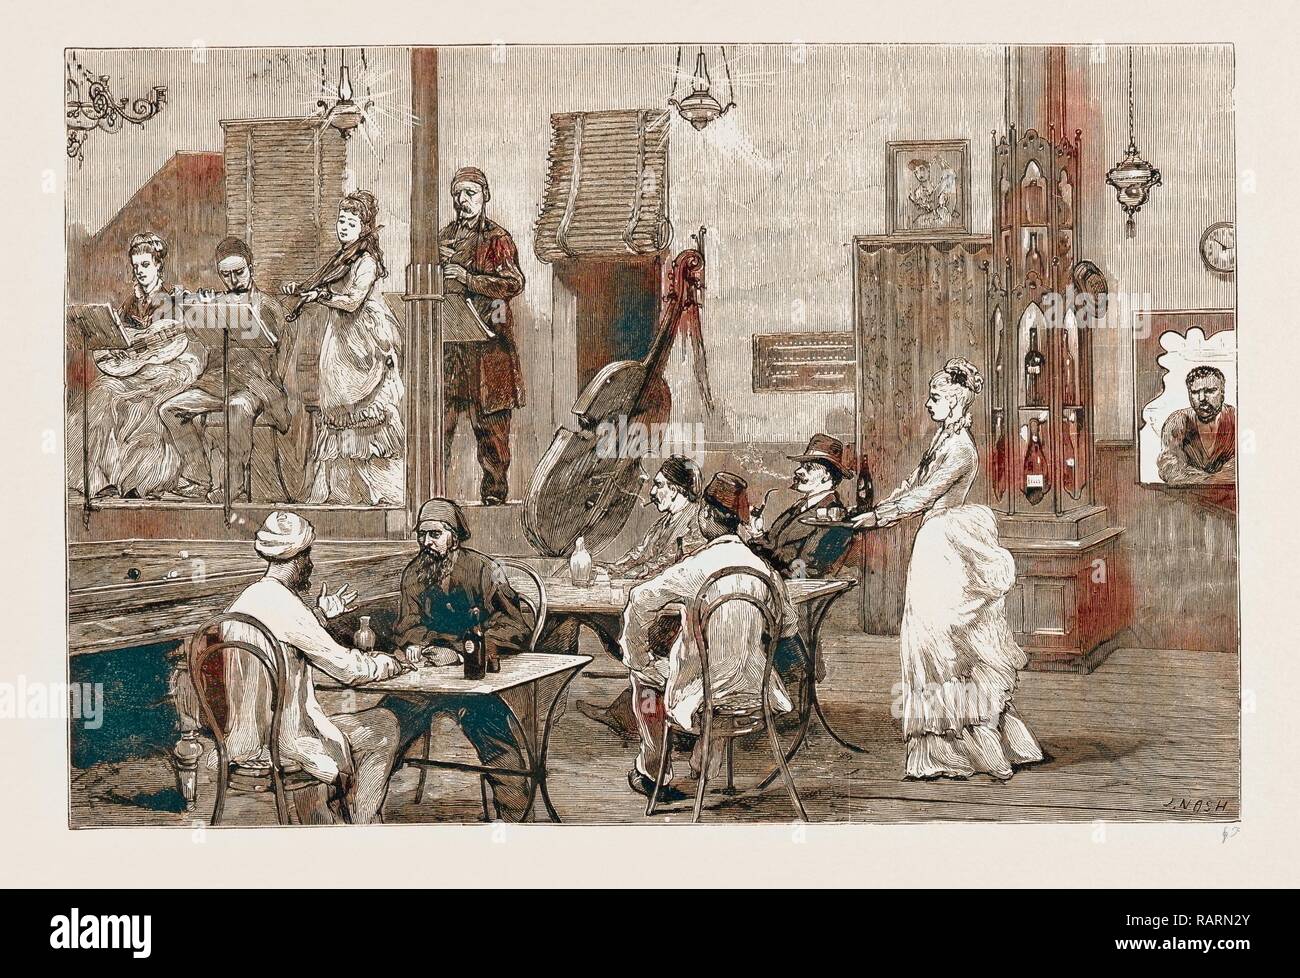 A 'CAFE CHANTANT' AT ISMAILIA, PAKISTAN, 1876. Reimagined by Gibon. Classic art with a modern twist reimagined Stock Photo